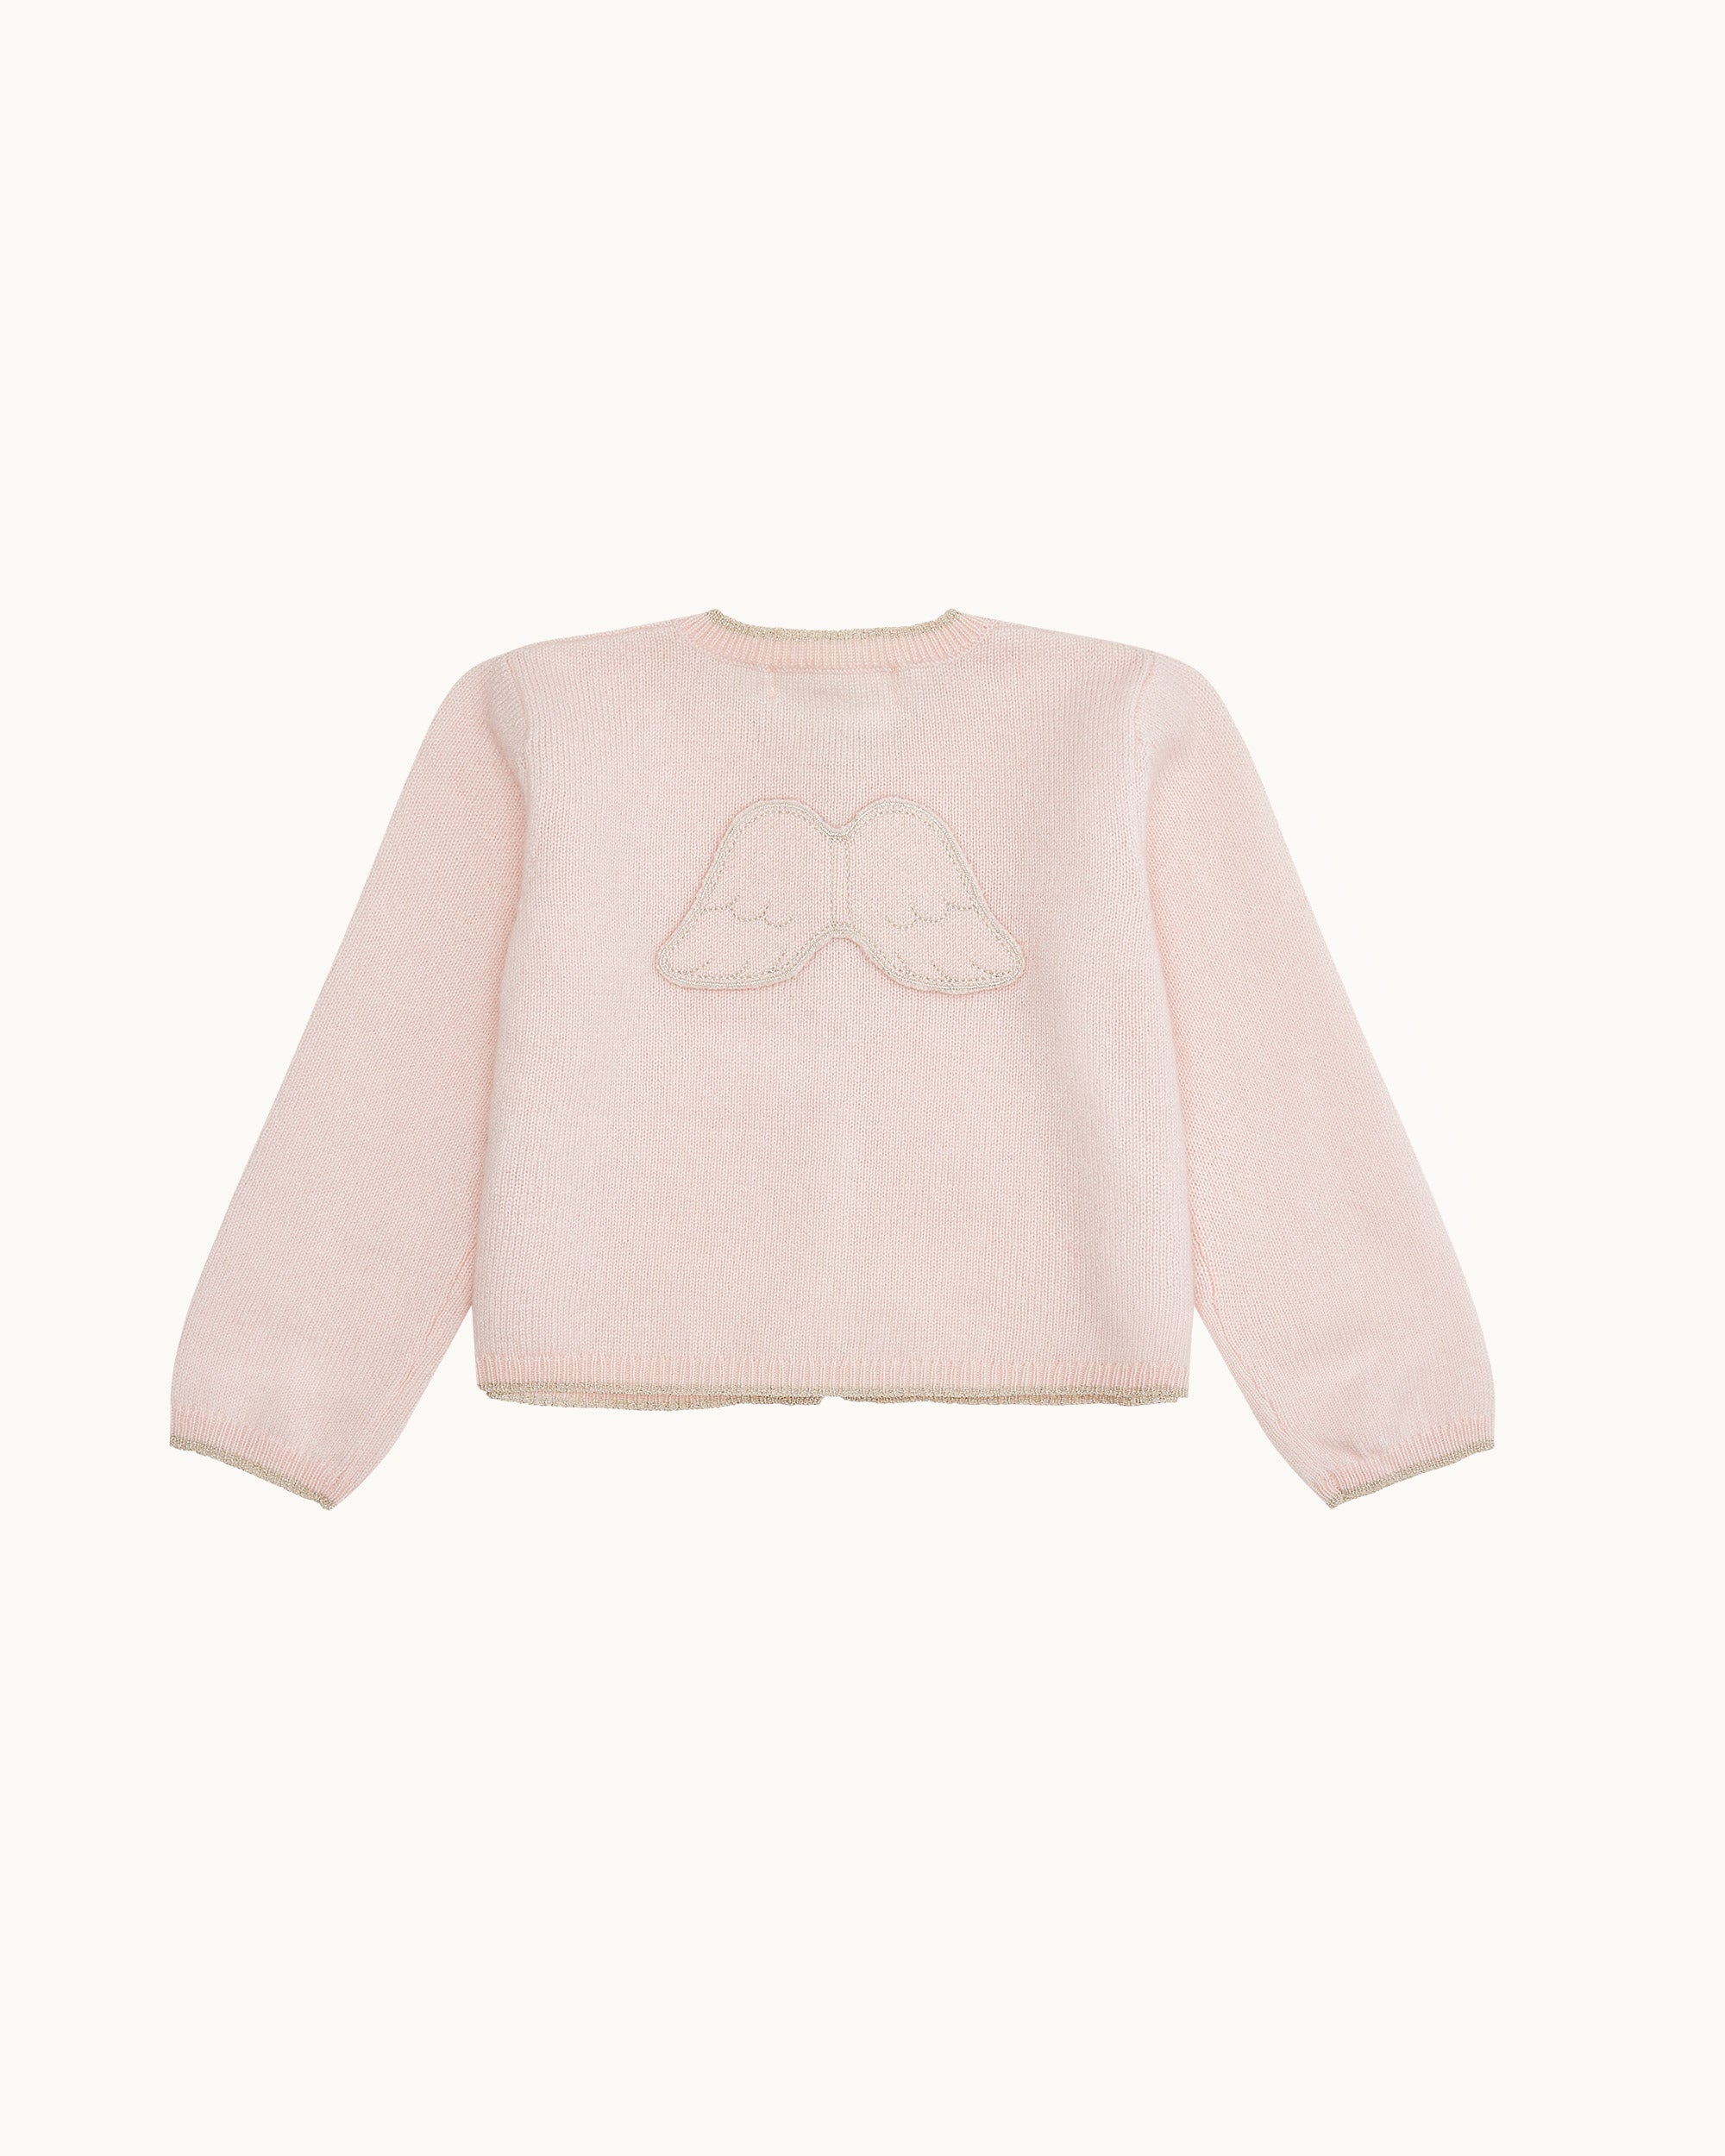 The Little Cashmere Outfit - Pink